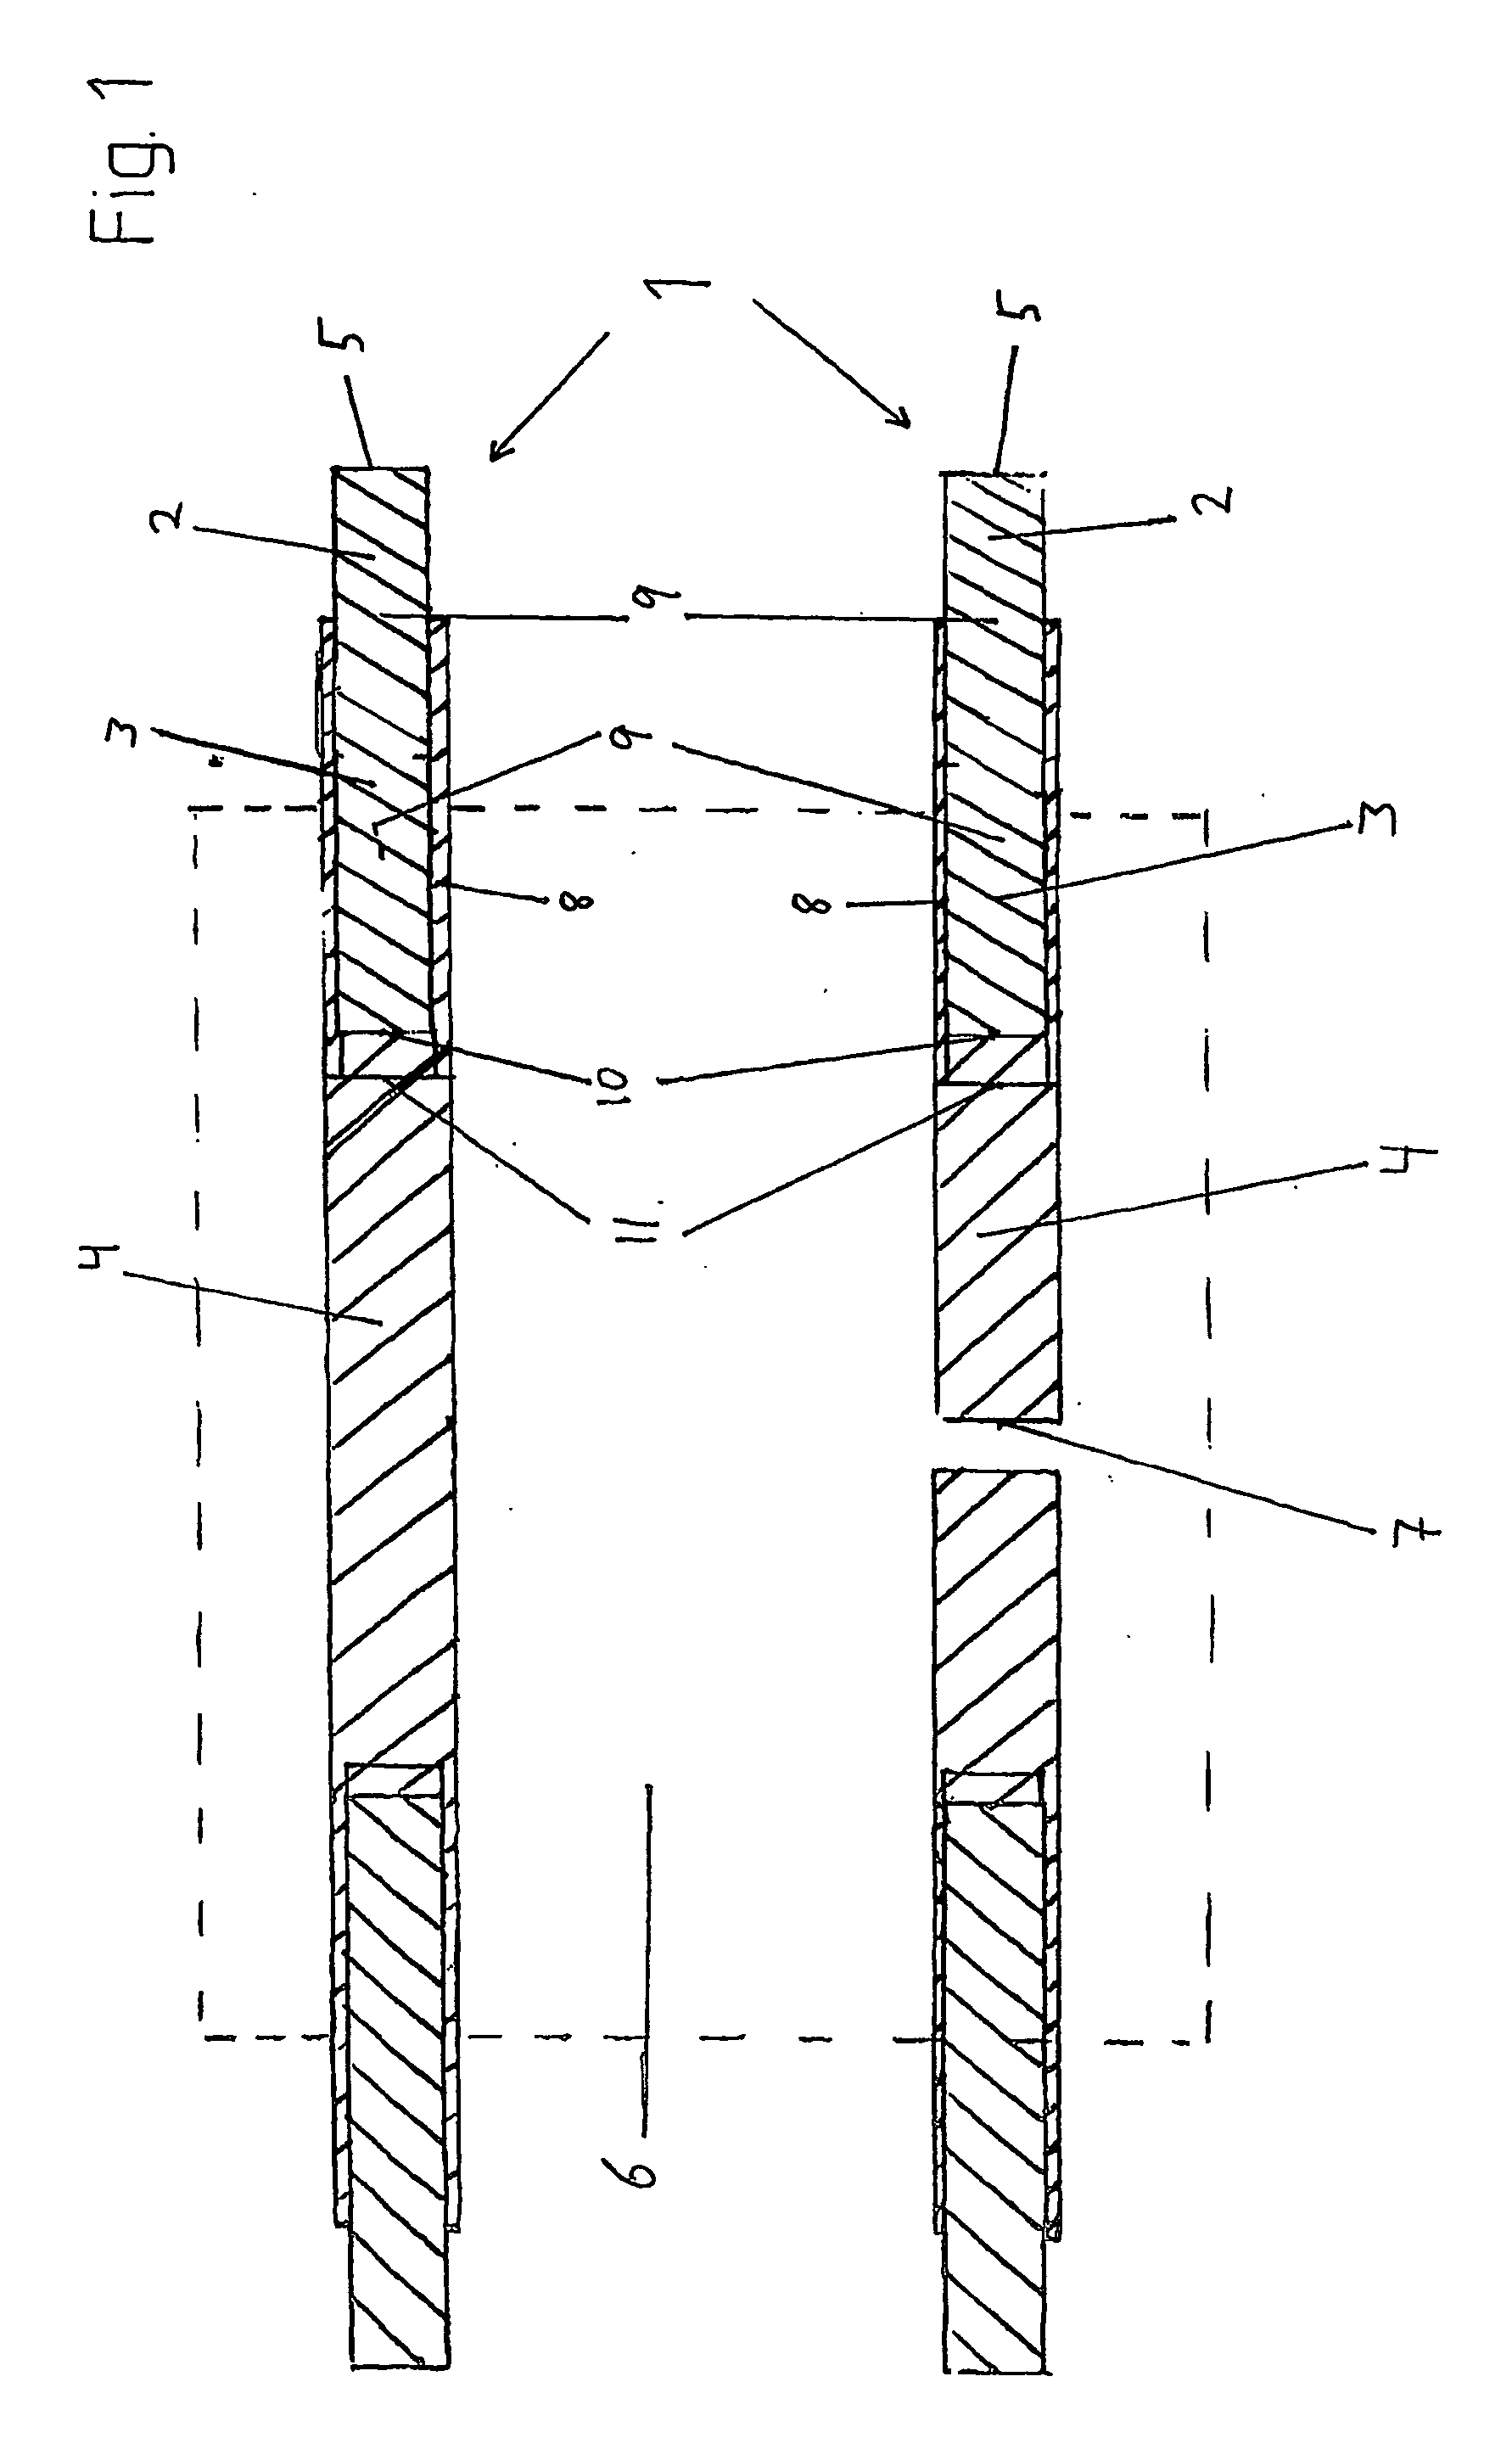 Devices to conduct current to or from the electrodes in electrolysis cells, methods for preparation thereof, and an electrolysis cell and a method for production of aluminium by electrolysis of alumina solved in a melted electrolyte